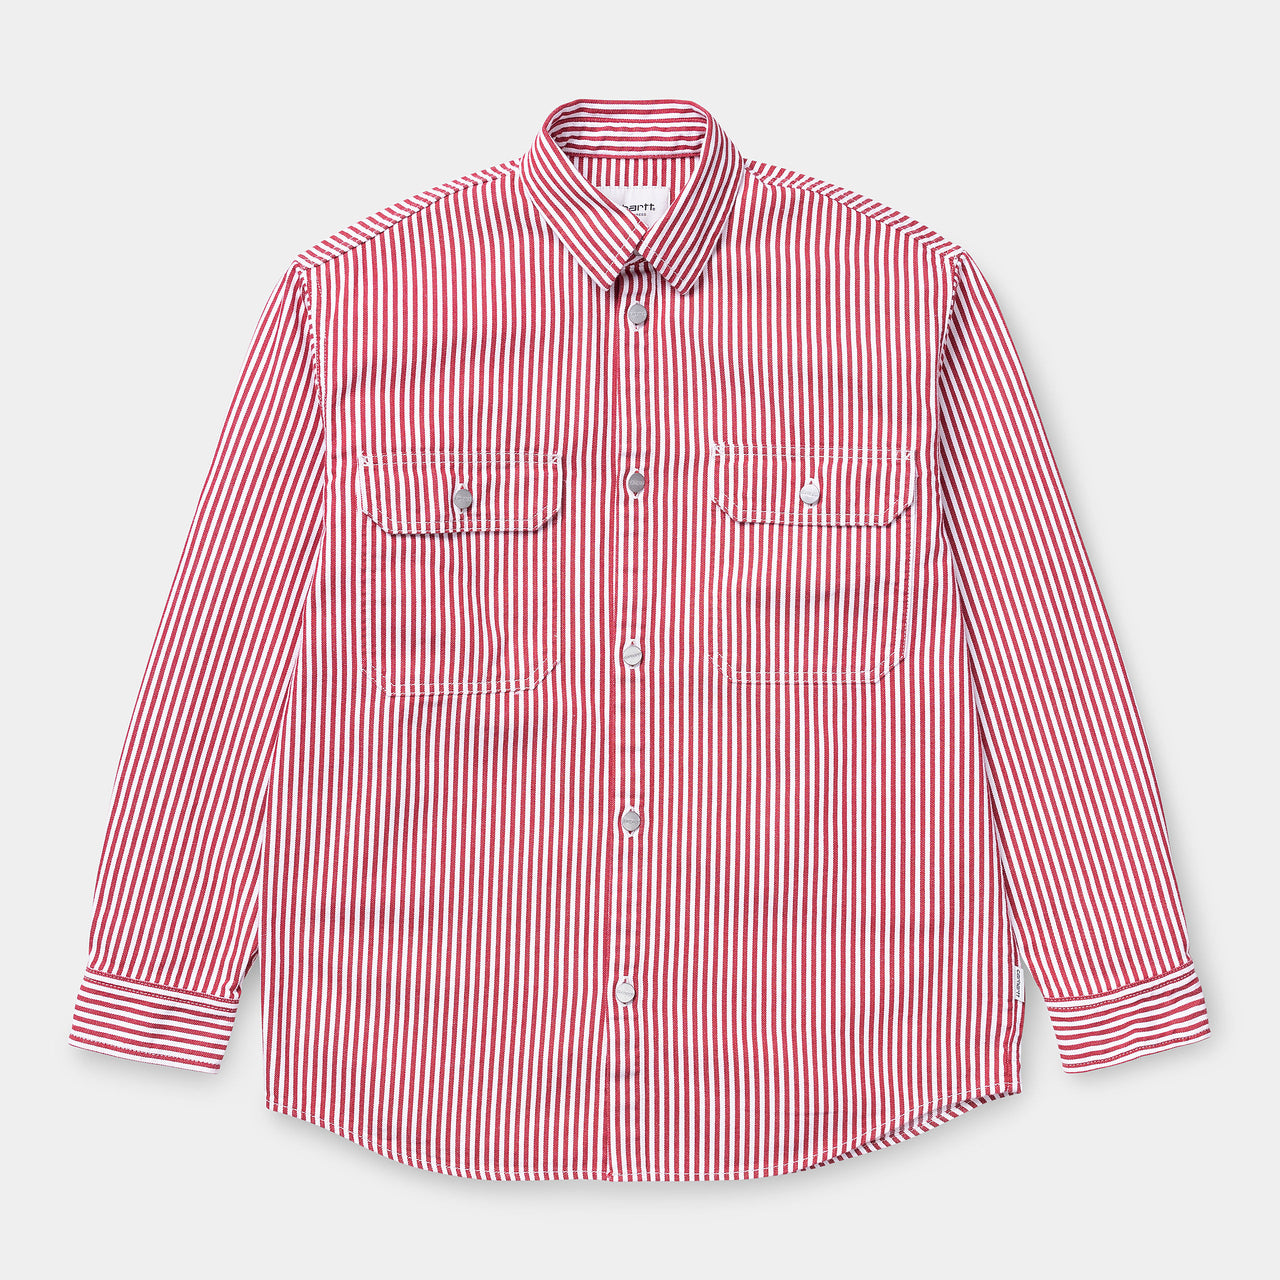 W' L/S Great Master Shirt Red / White